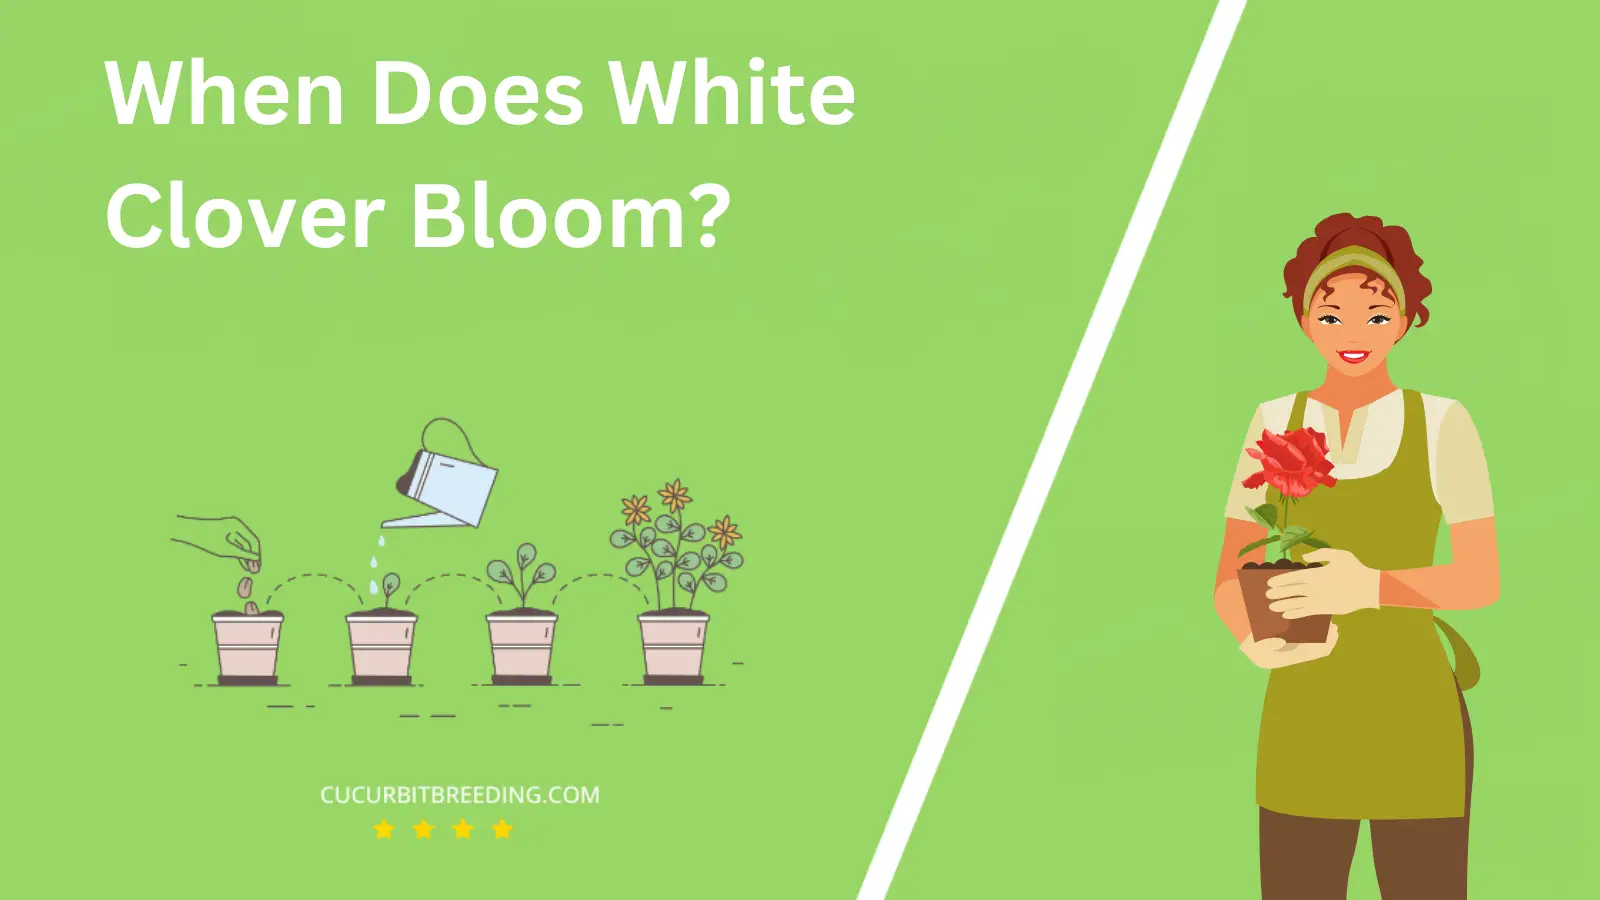 When Does White Clover Bloom?